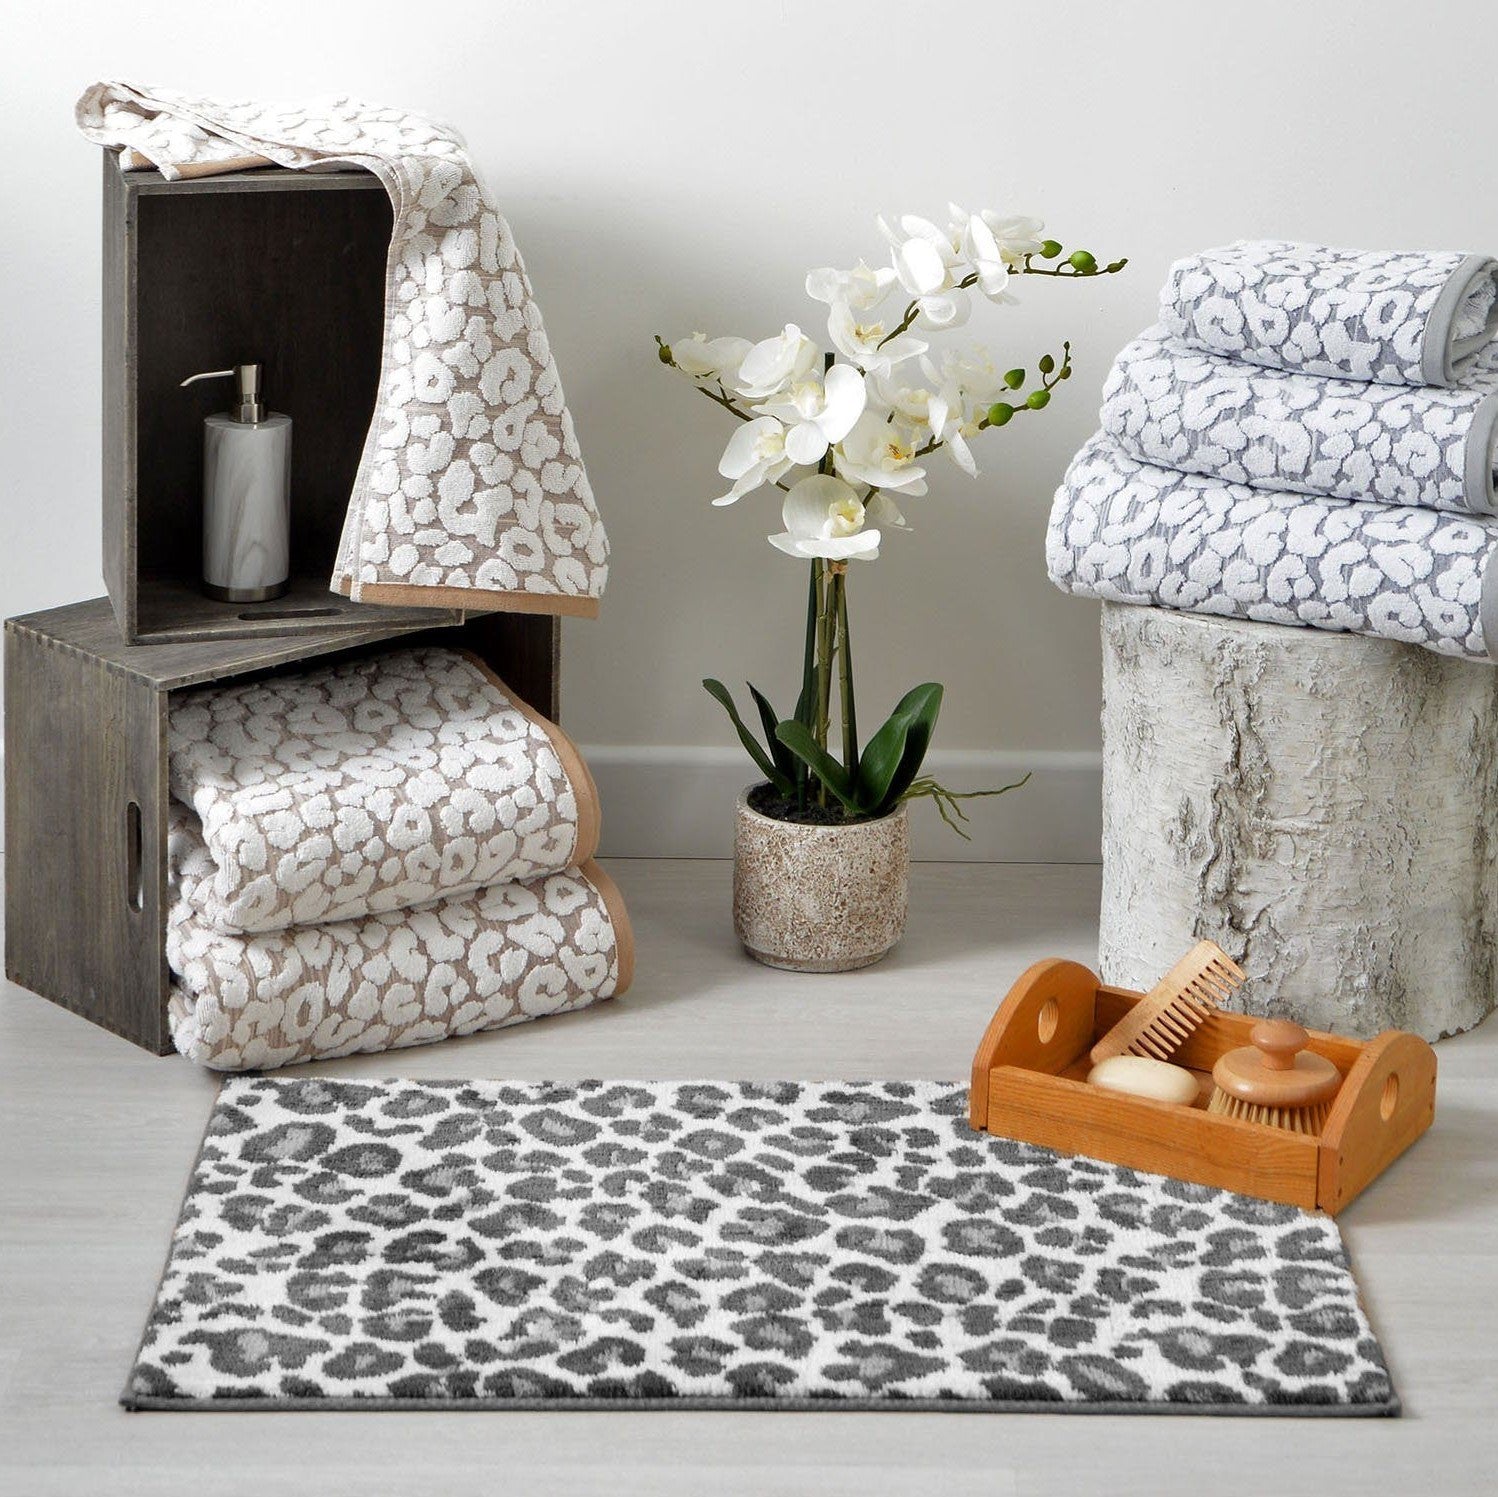 Leopard Print Bathroom Collection - Matching Towels and Bath Mat